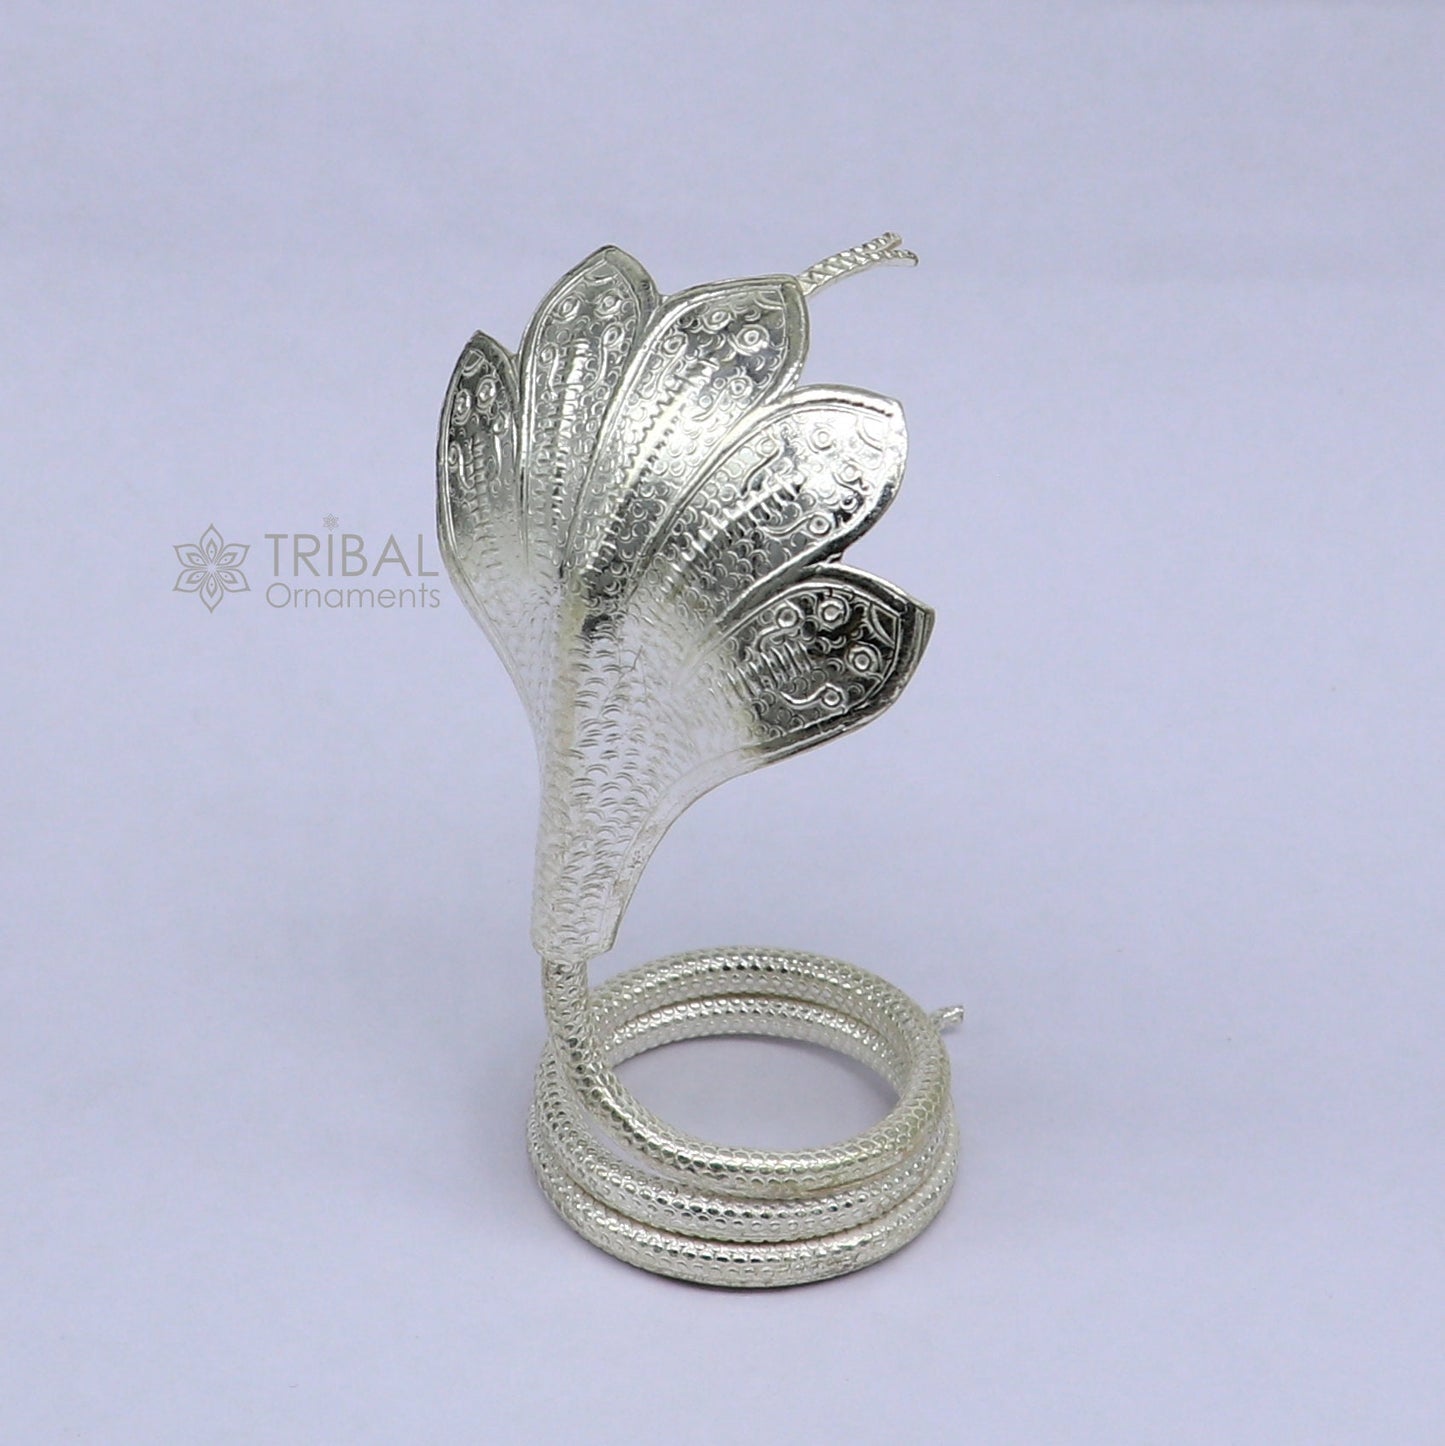 925 sterling silver solid divine panchmukhi Sheshnag, wonderful shiva snake amazing puja articles or utensils for home or temple su1164 - TRIBAL ORNAMENTS